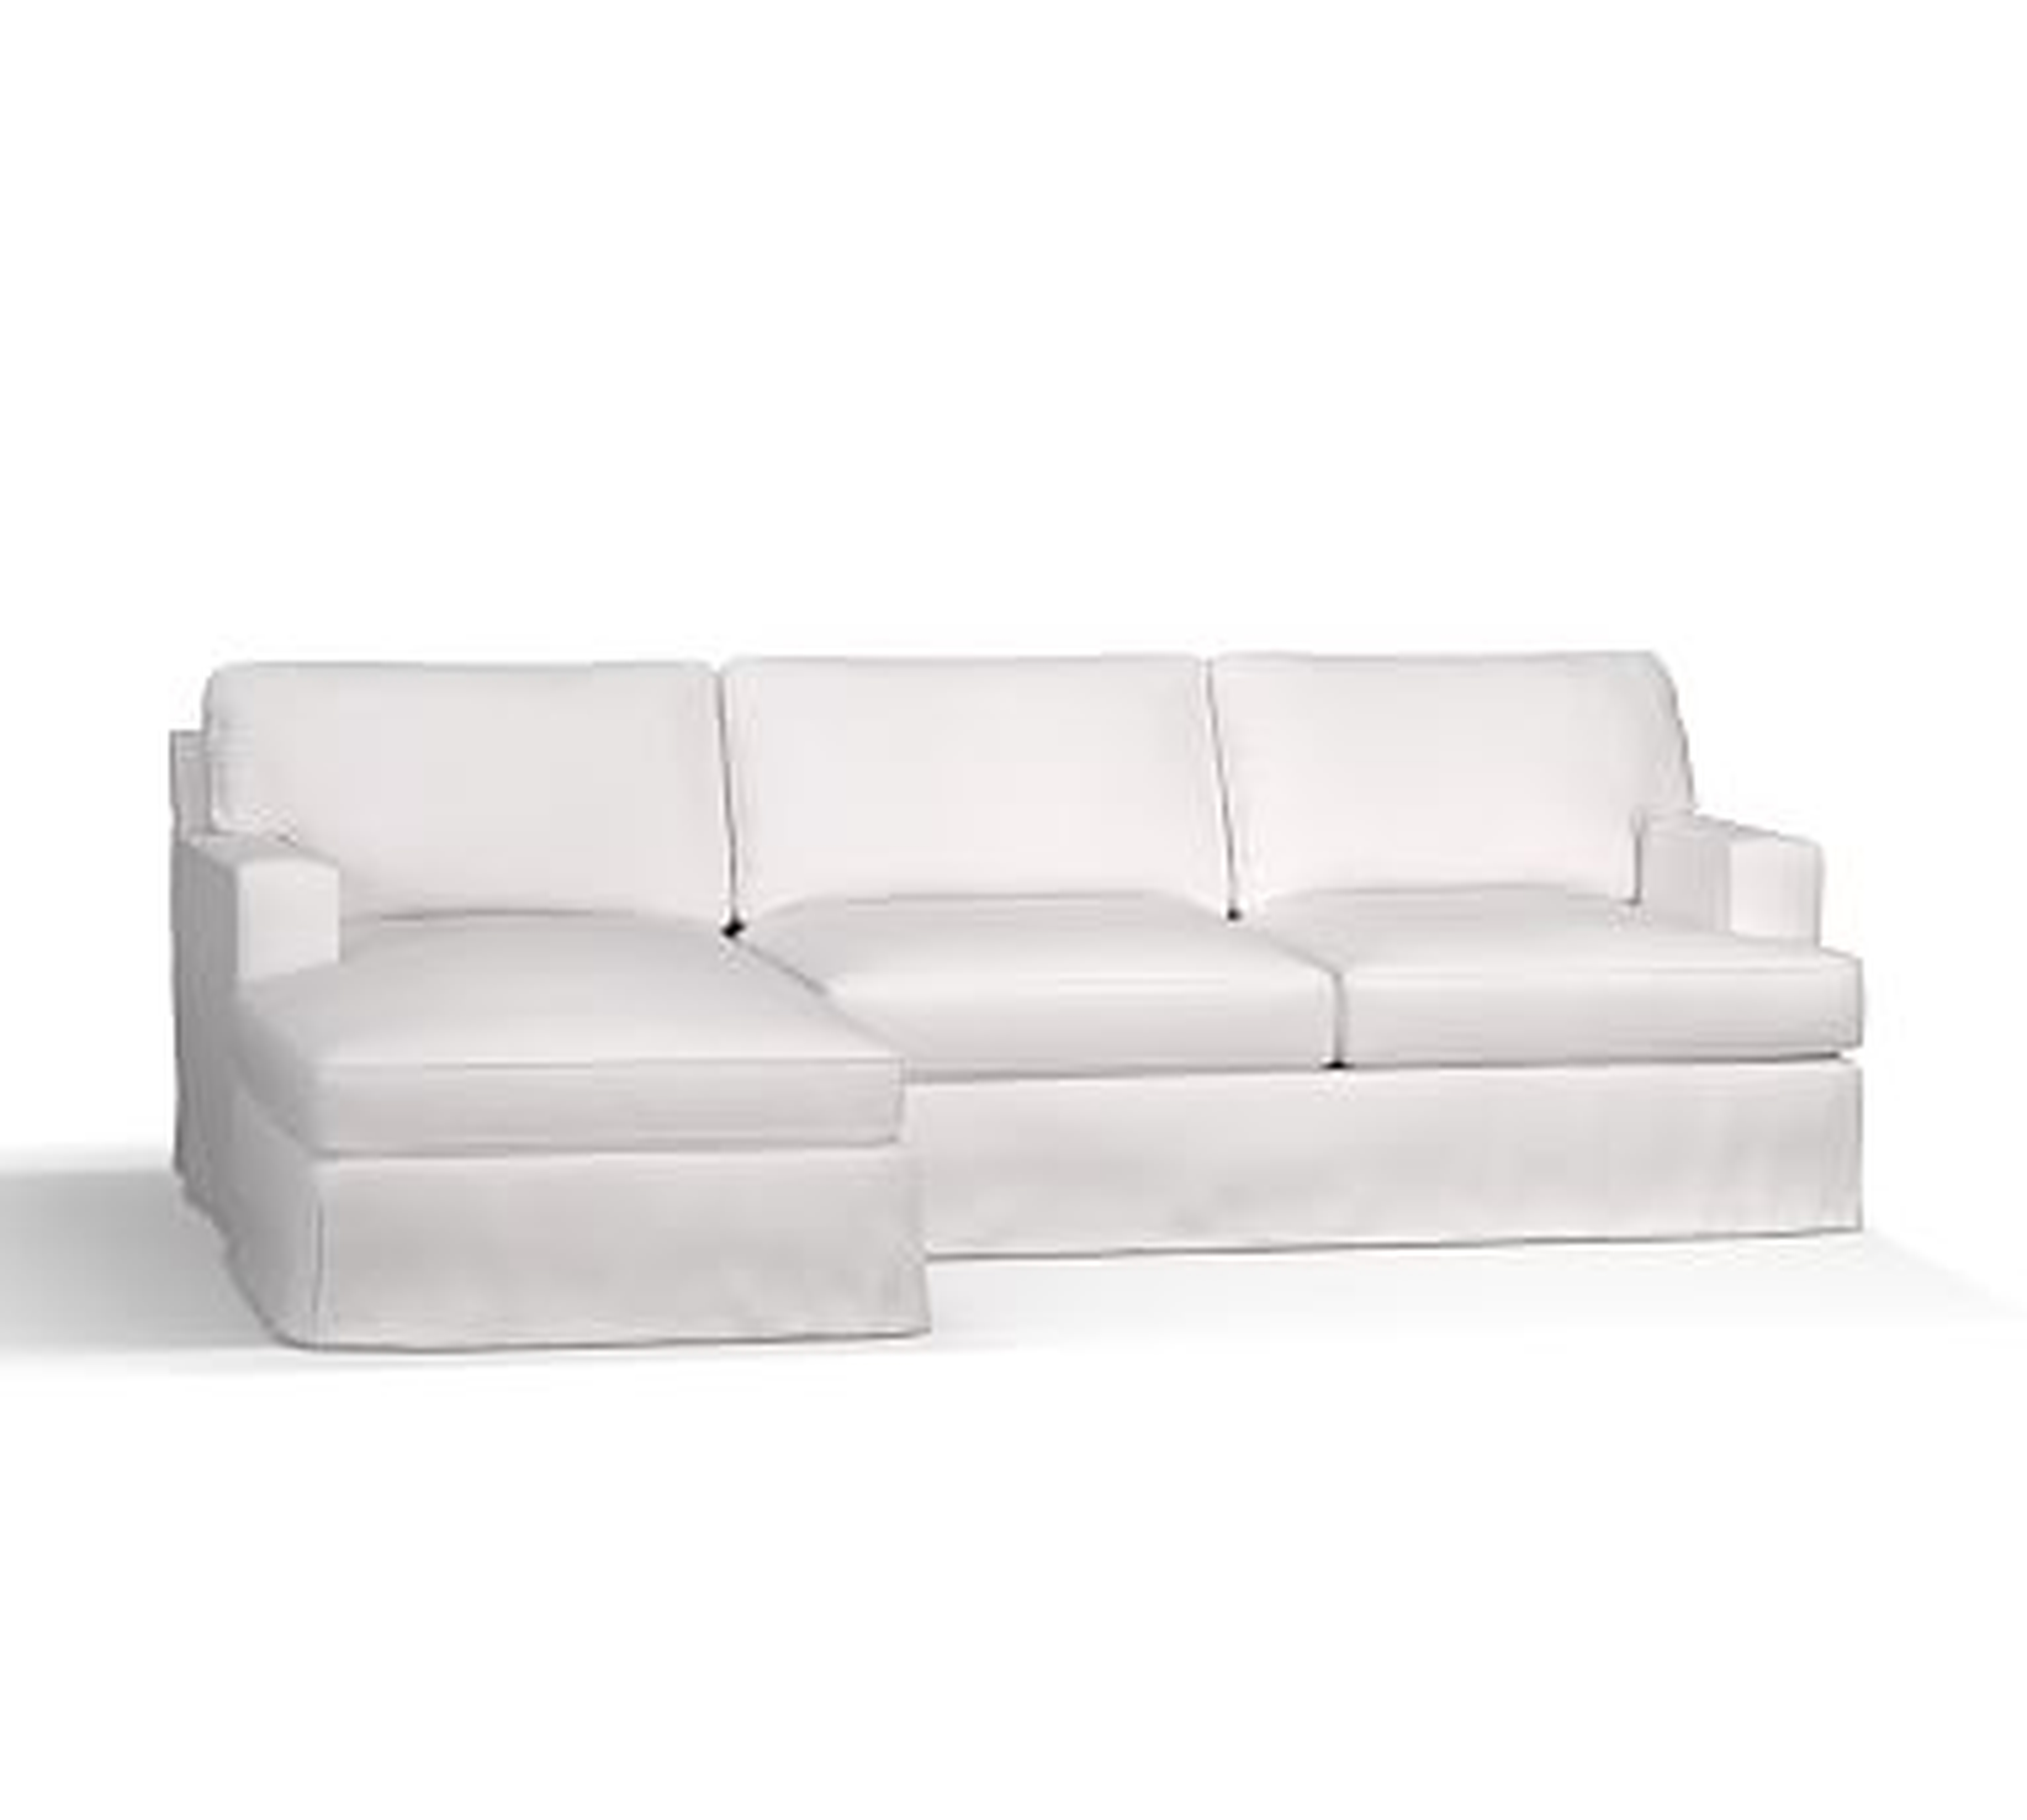 Townsend Square Arm Slipcovered Right Chaise Sofa Sectional, Polyester Wrapped Cushions, Twill White - Pottery Barn